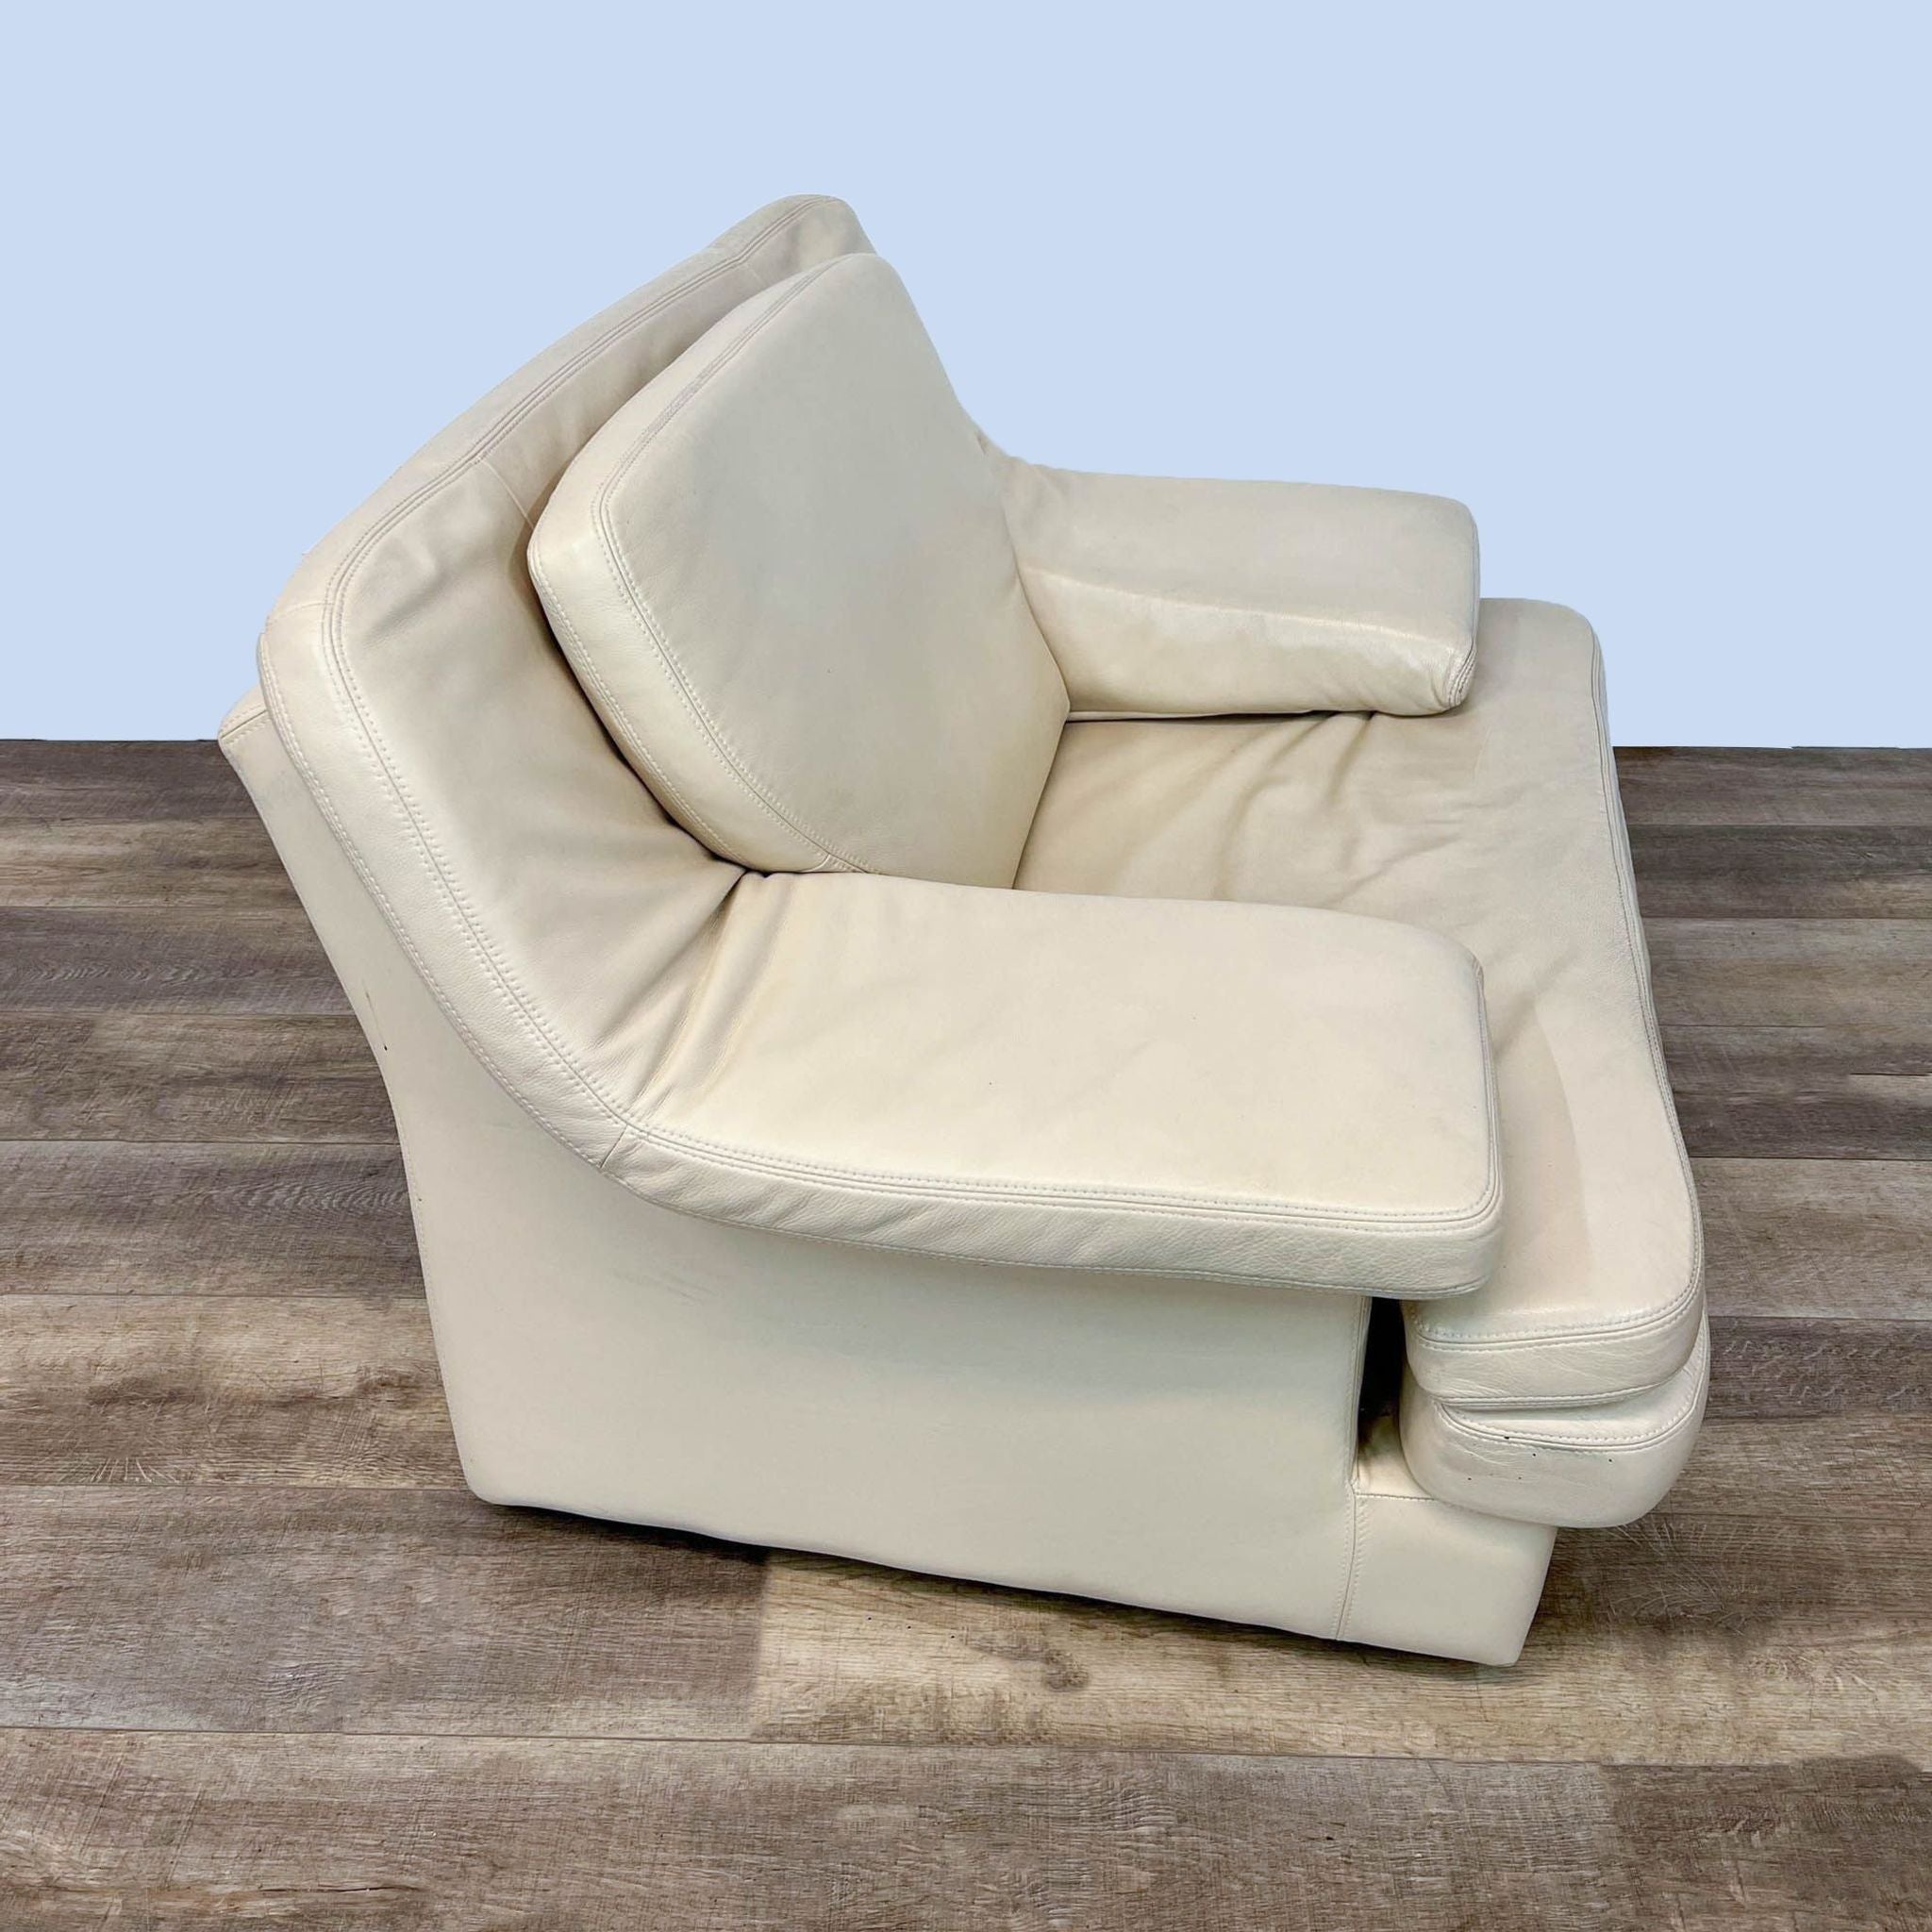 Reperch modern lounge chair in cream leather with plush upholstery and broad armrests on wood feet. Angled and rear views.